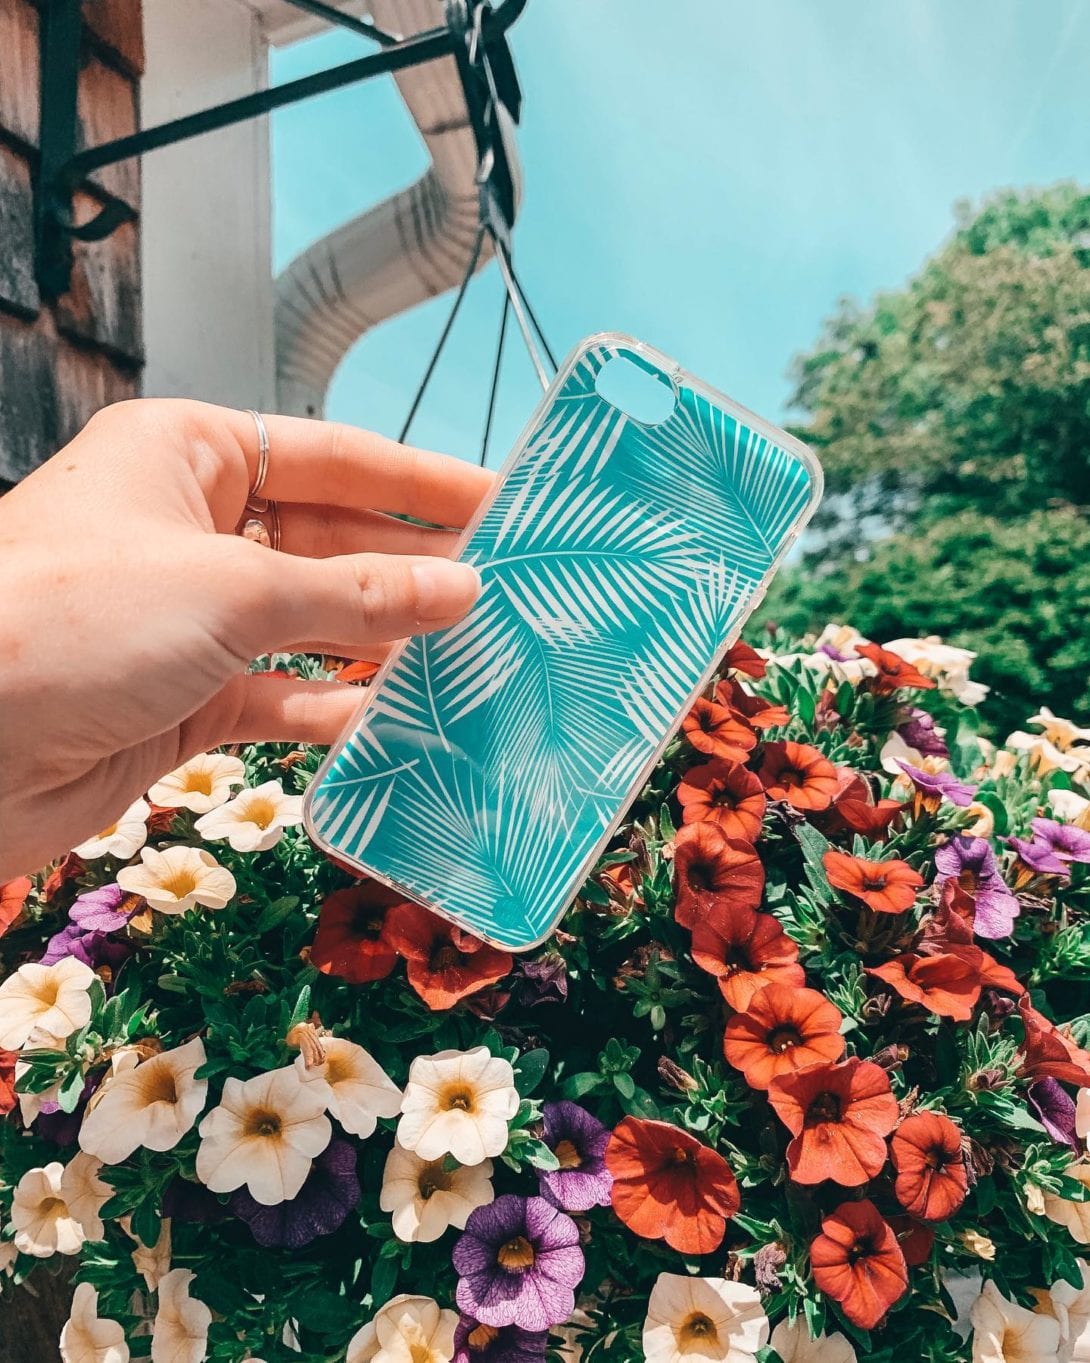 celebrate the summer weather with this blue palms case  check this design and over 400 more out on WWW.CASESBYKATE.COM •
•
•
•
•
•
•